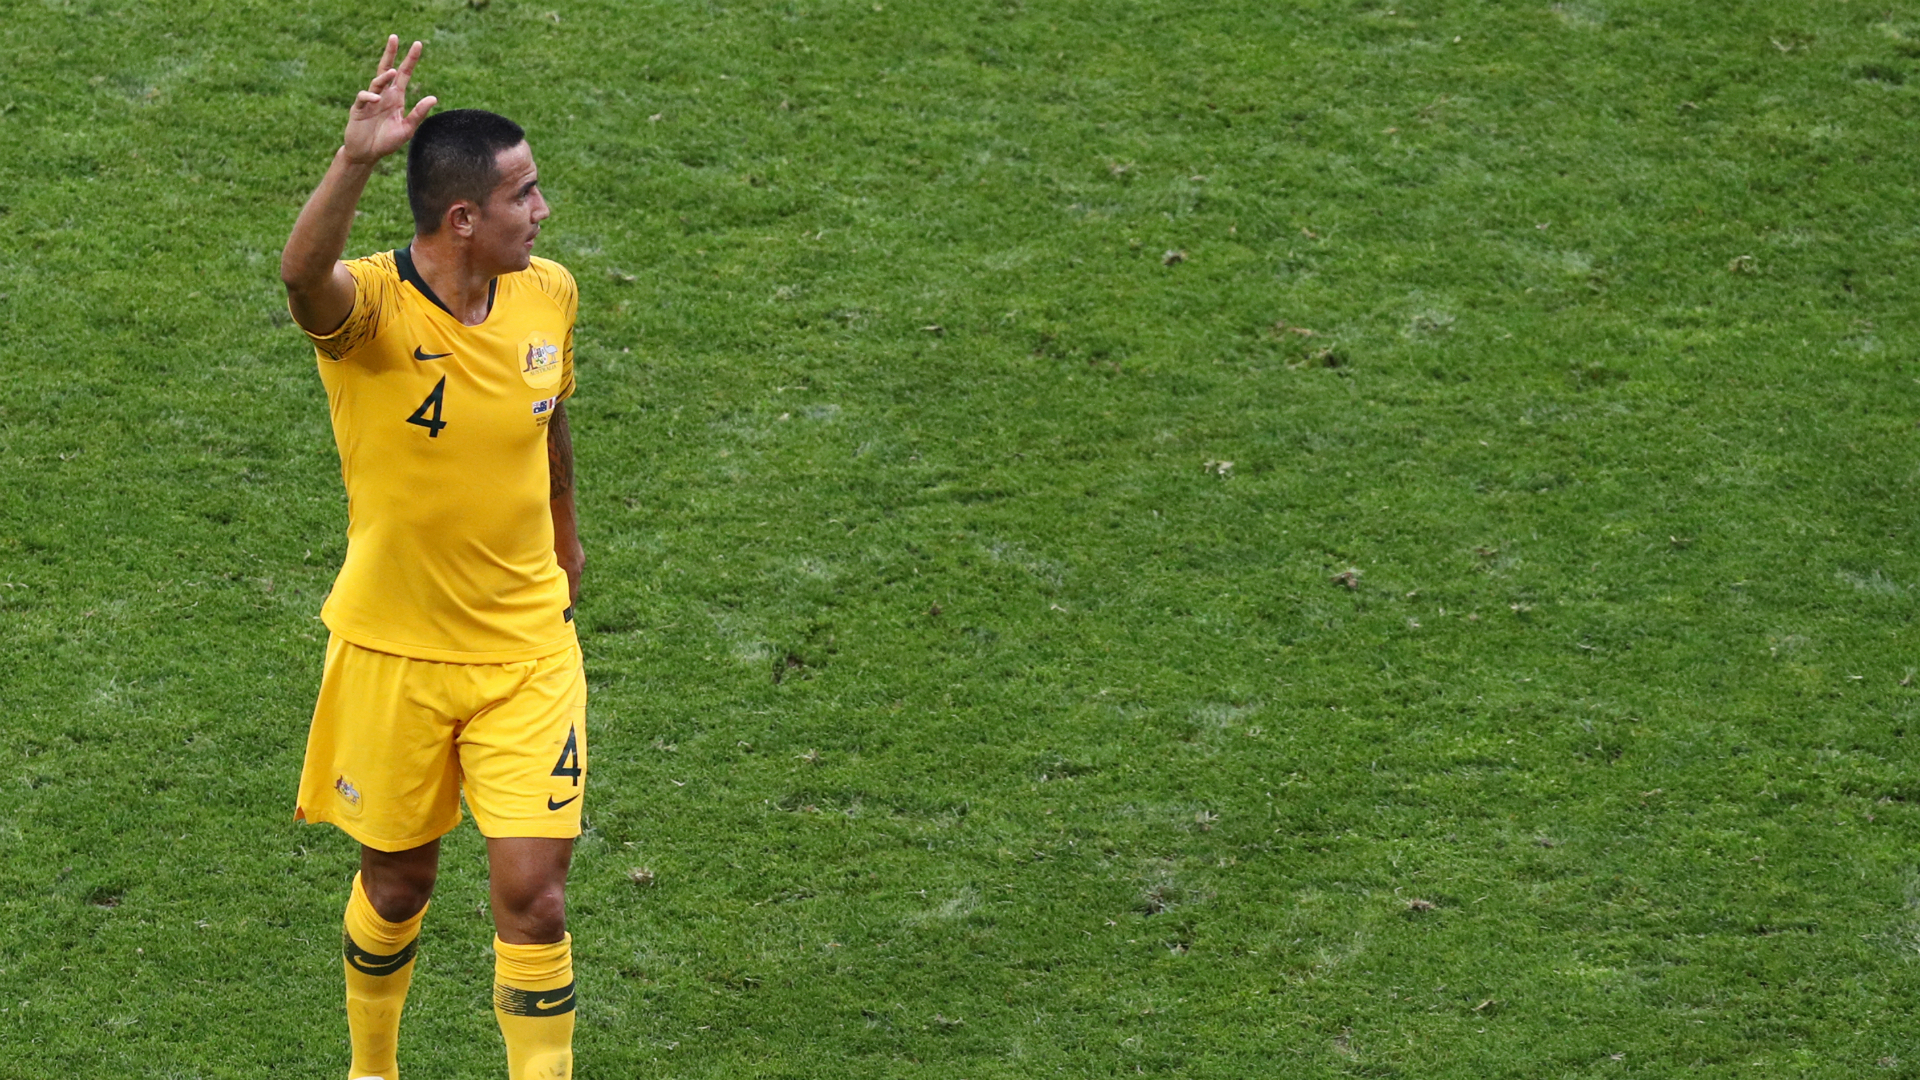 Tim Cahill: Africa's first World Cup was one of the best because of the warmth of the people